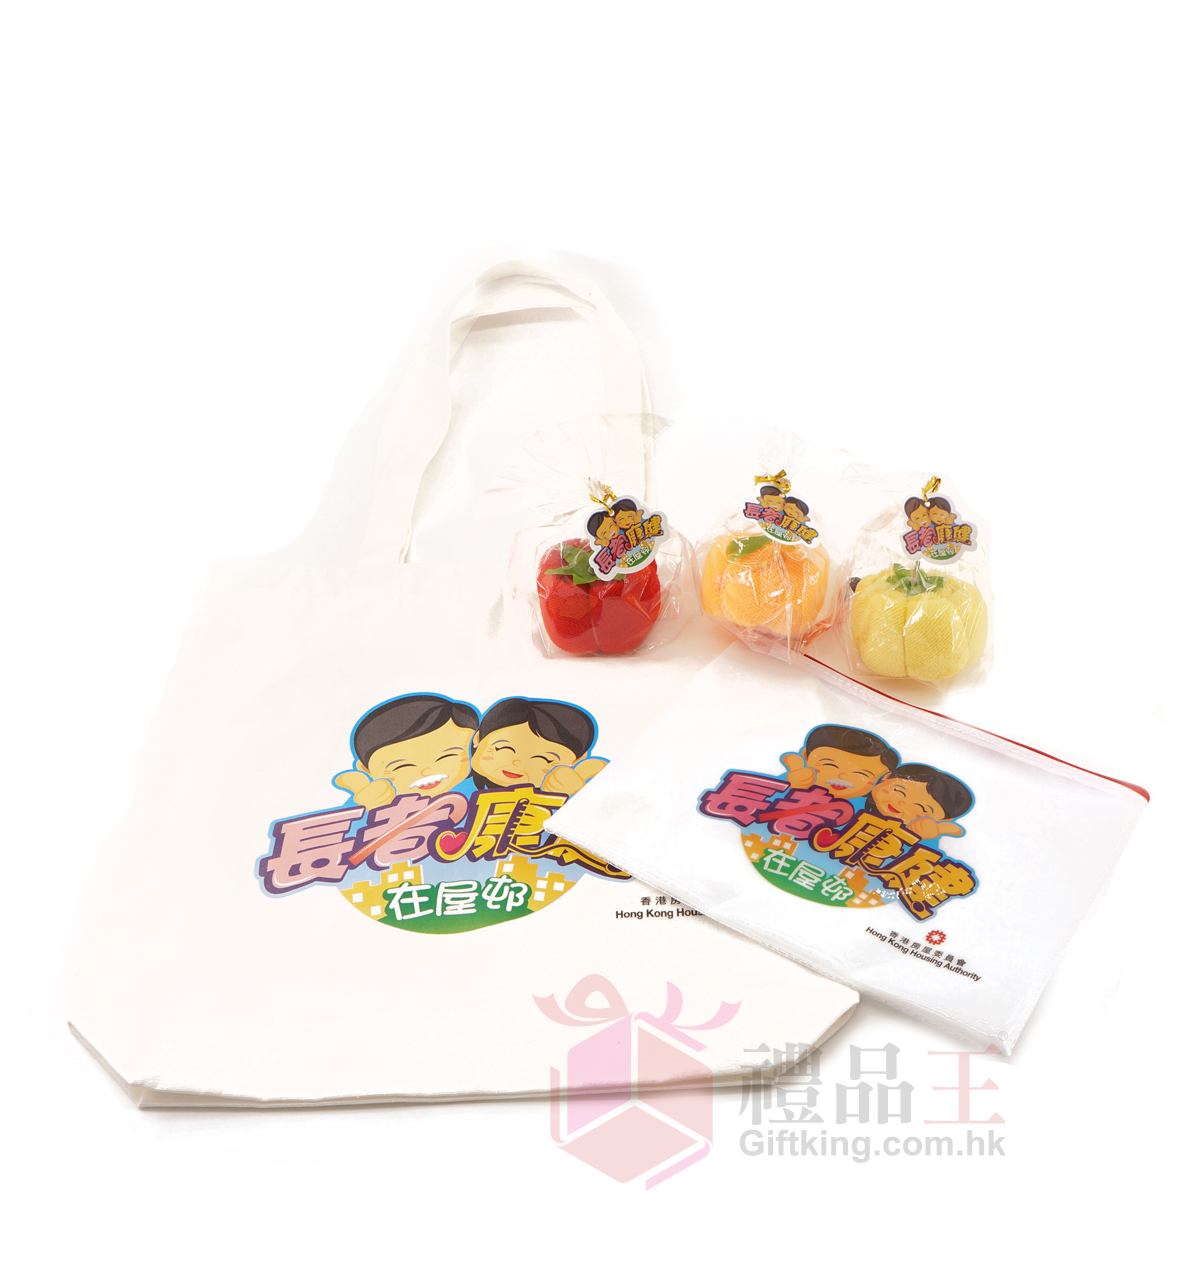 Hong Kong Housing Authority Canvas Bags + Shaped Towels + Zipper Bags (Advertising Gifts)